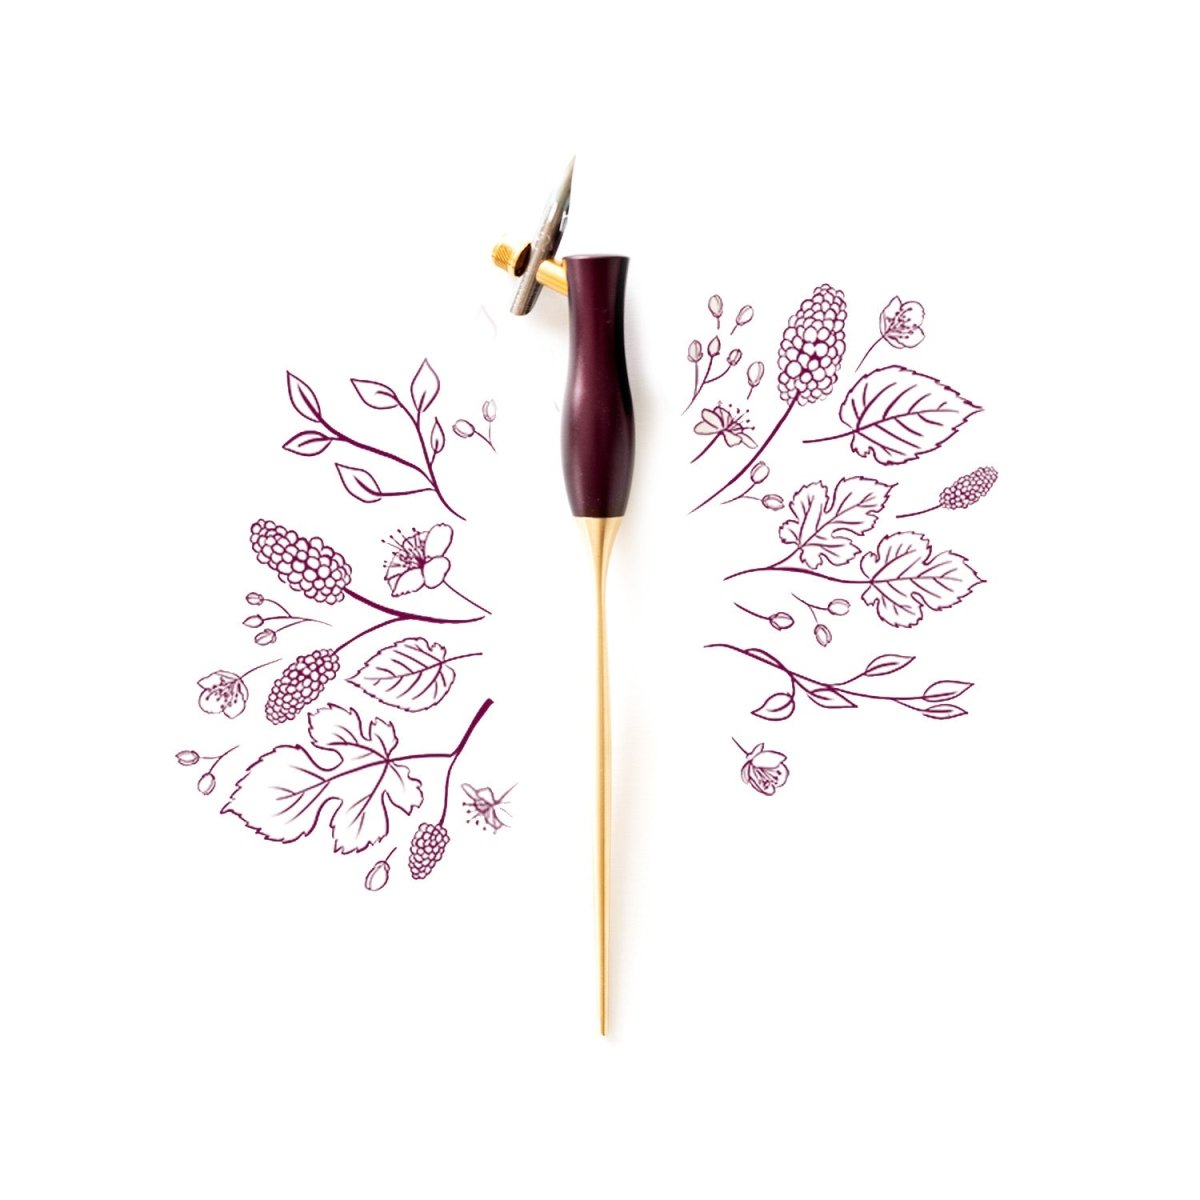 The bloom oblique calligraphy pen in mulberry on a background of illustration in ink